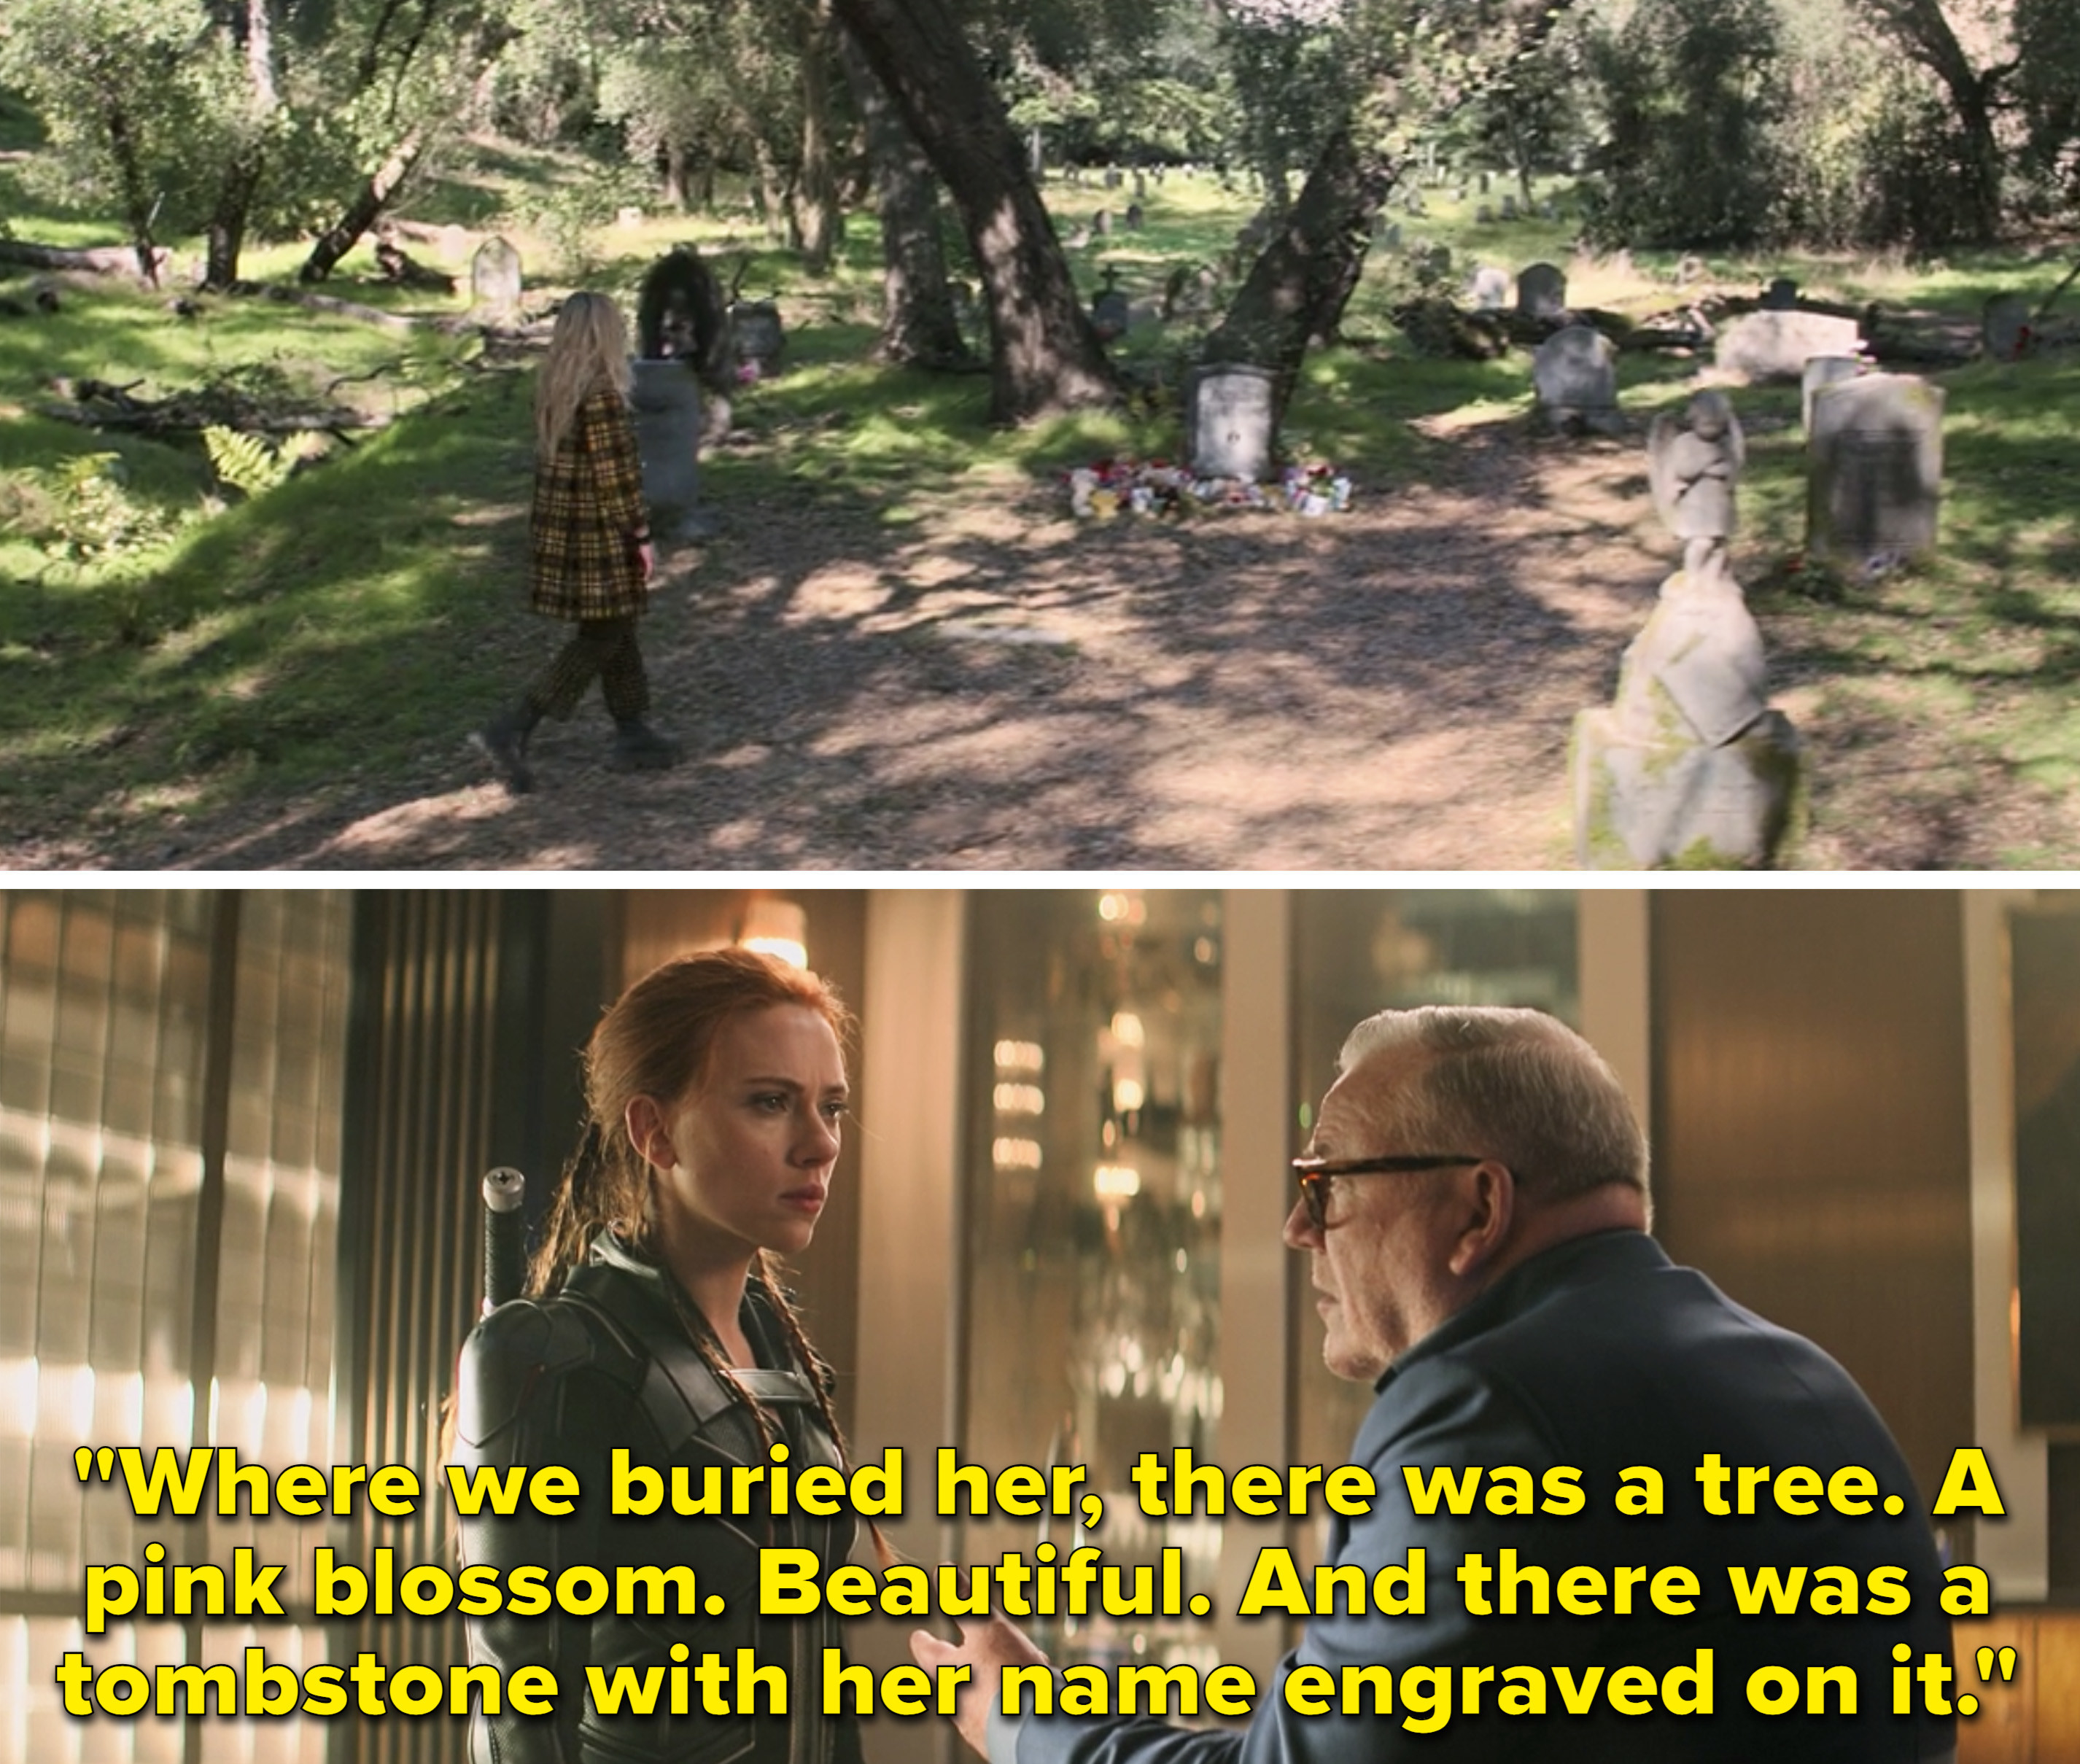 Natasha&#x27;s grave vs. Dreykov saying, &quot;Where we buried her, there was a tree. A pink blossom. Beautiful. And there was a tombstone with her name engraved on it&quot;